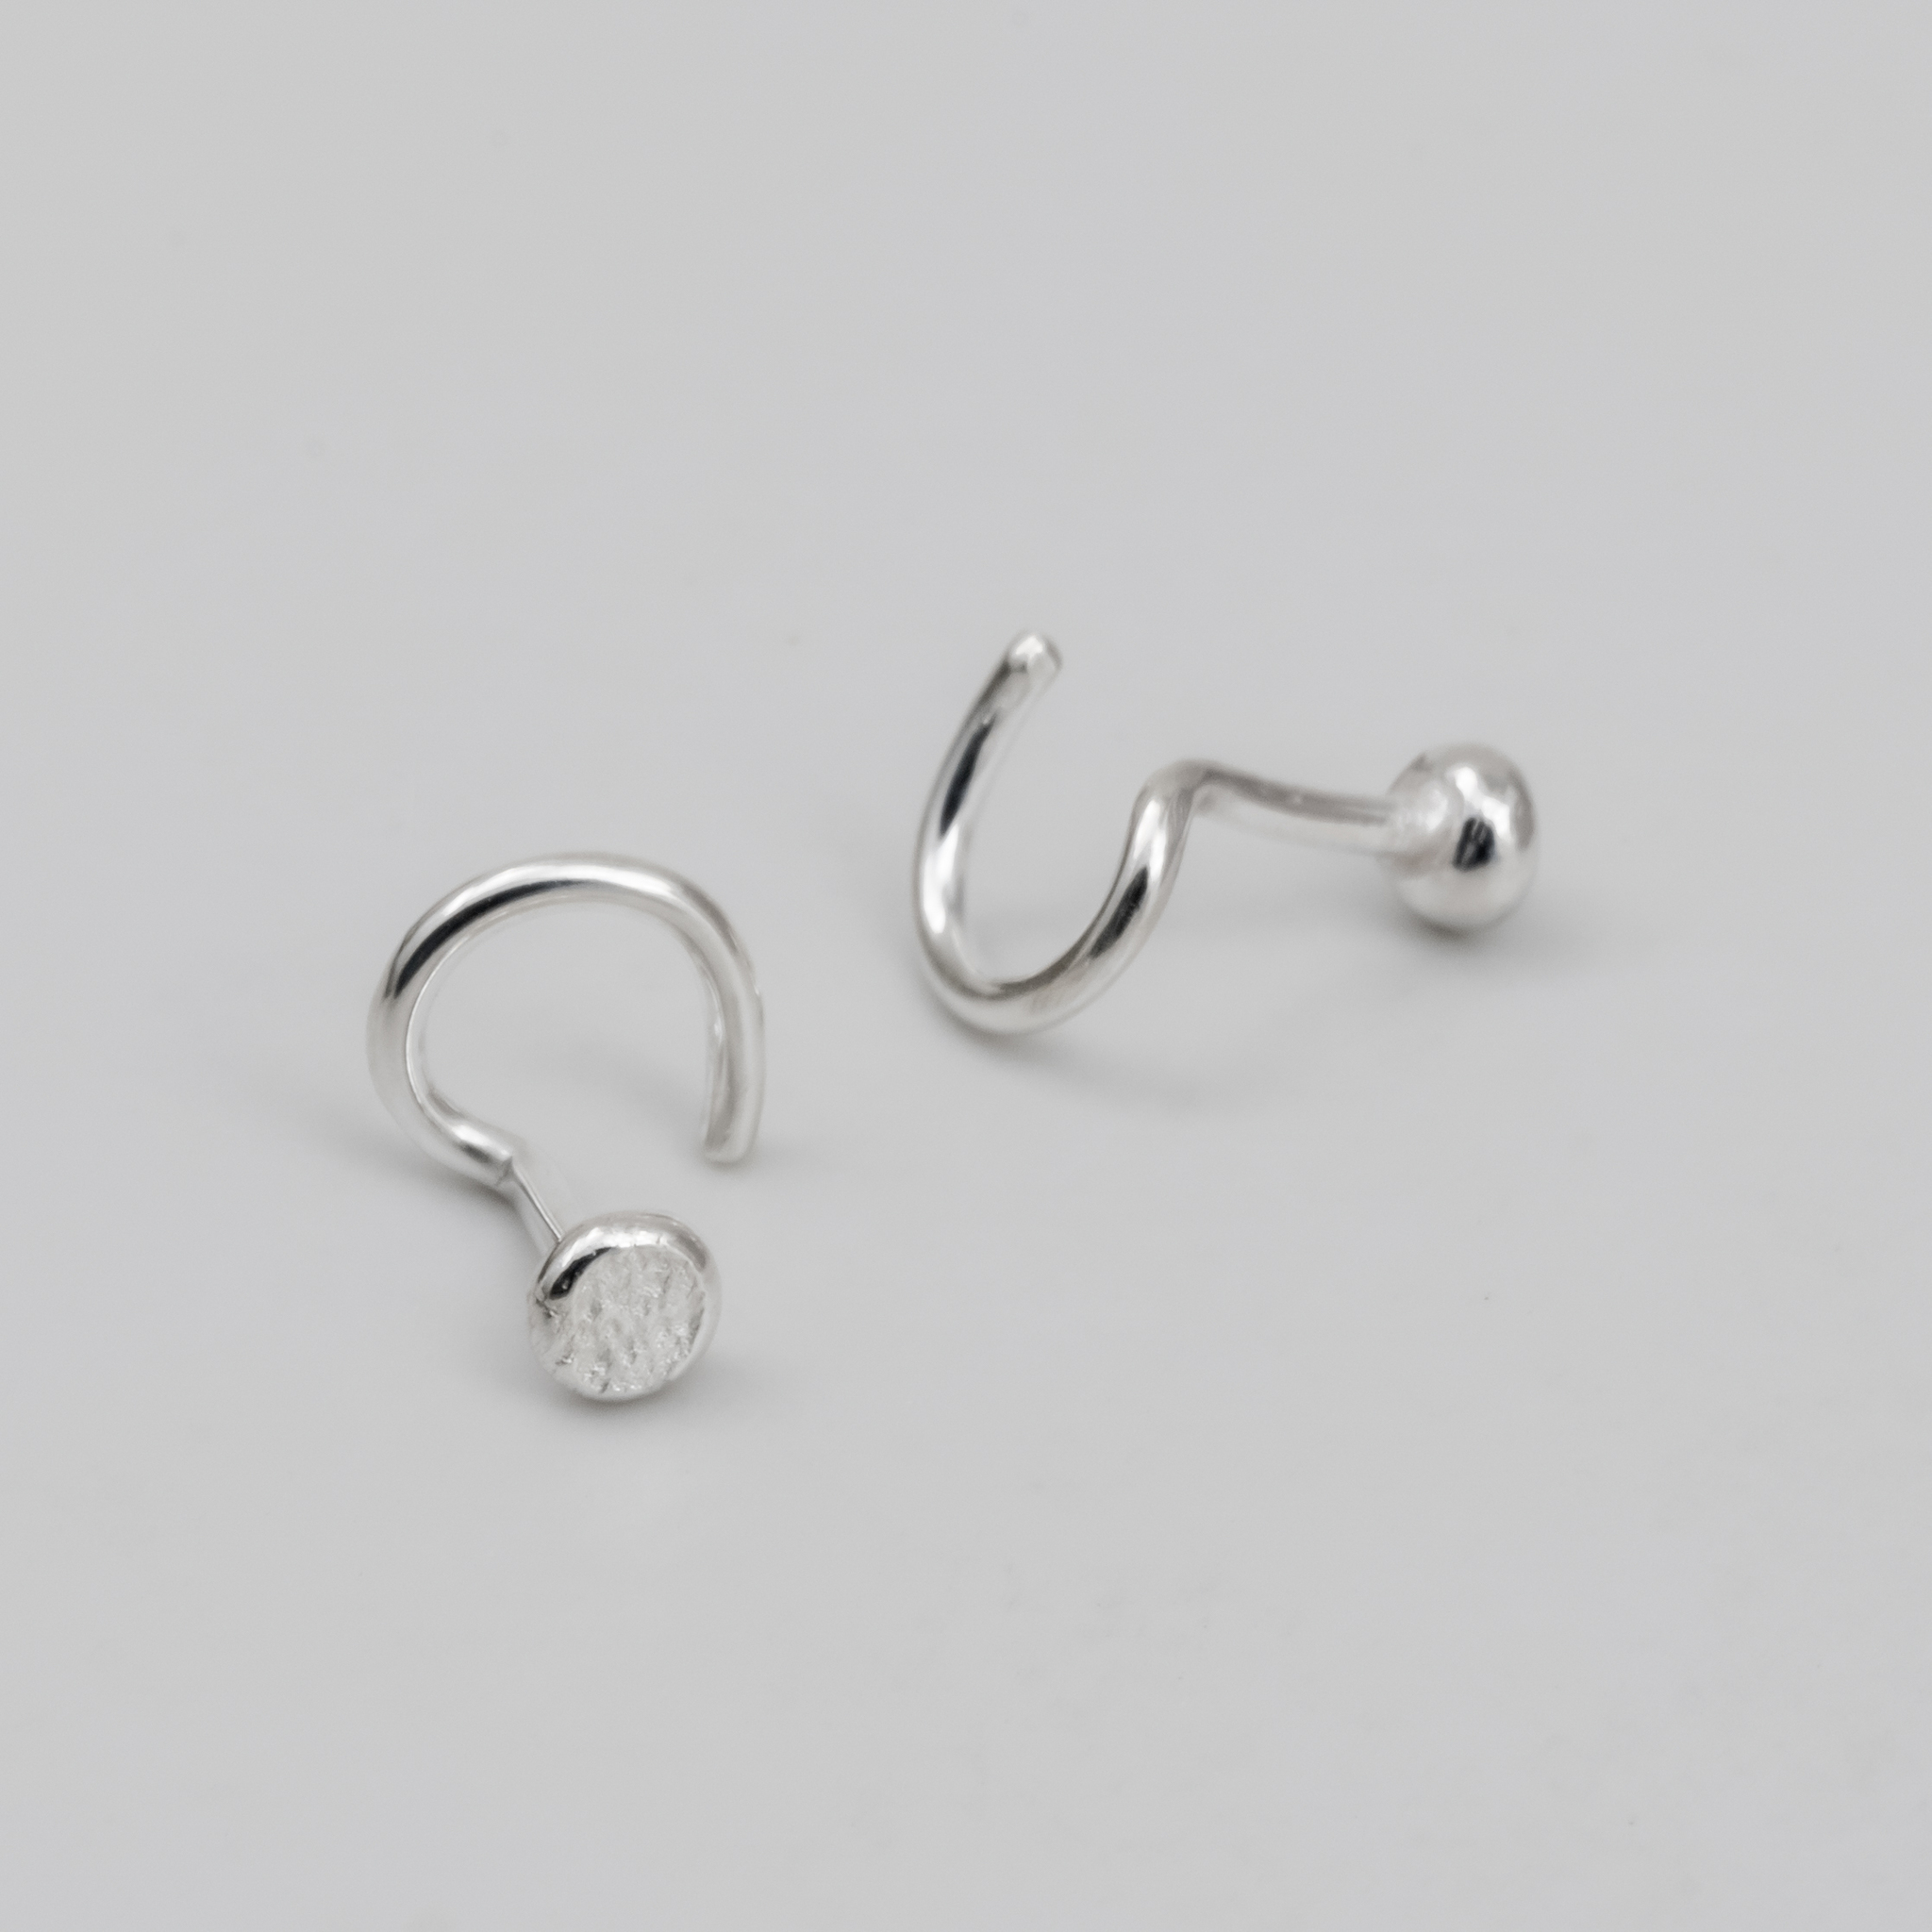 Second Hand - Asphalt Comfort Earrings in Recycled Silver